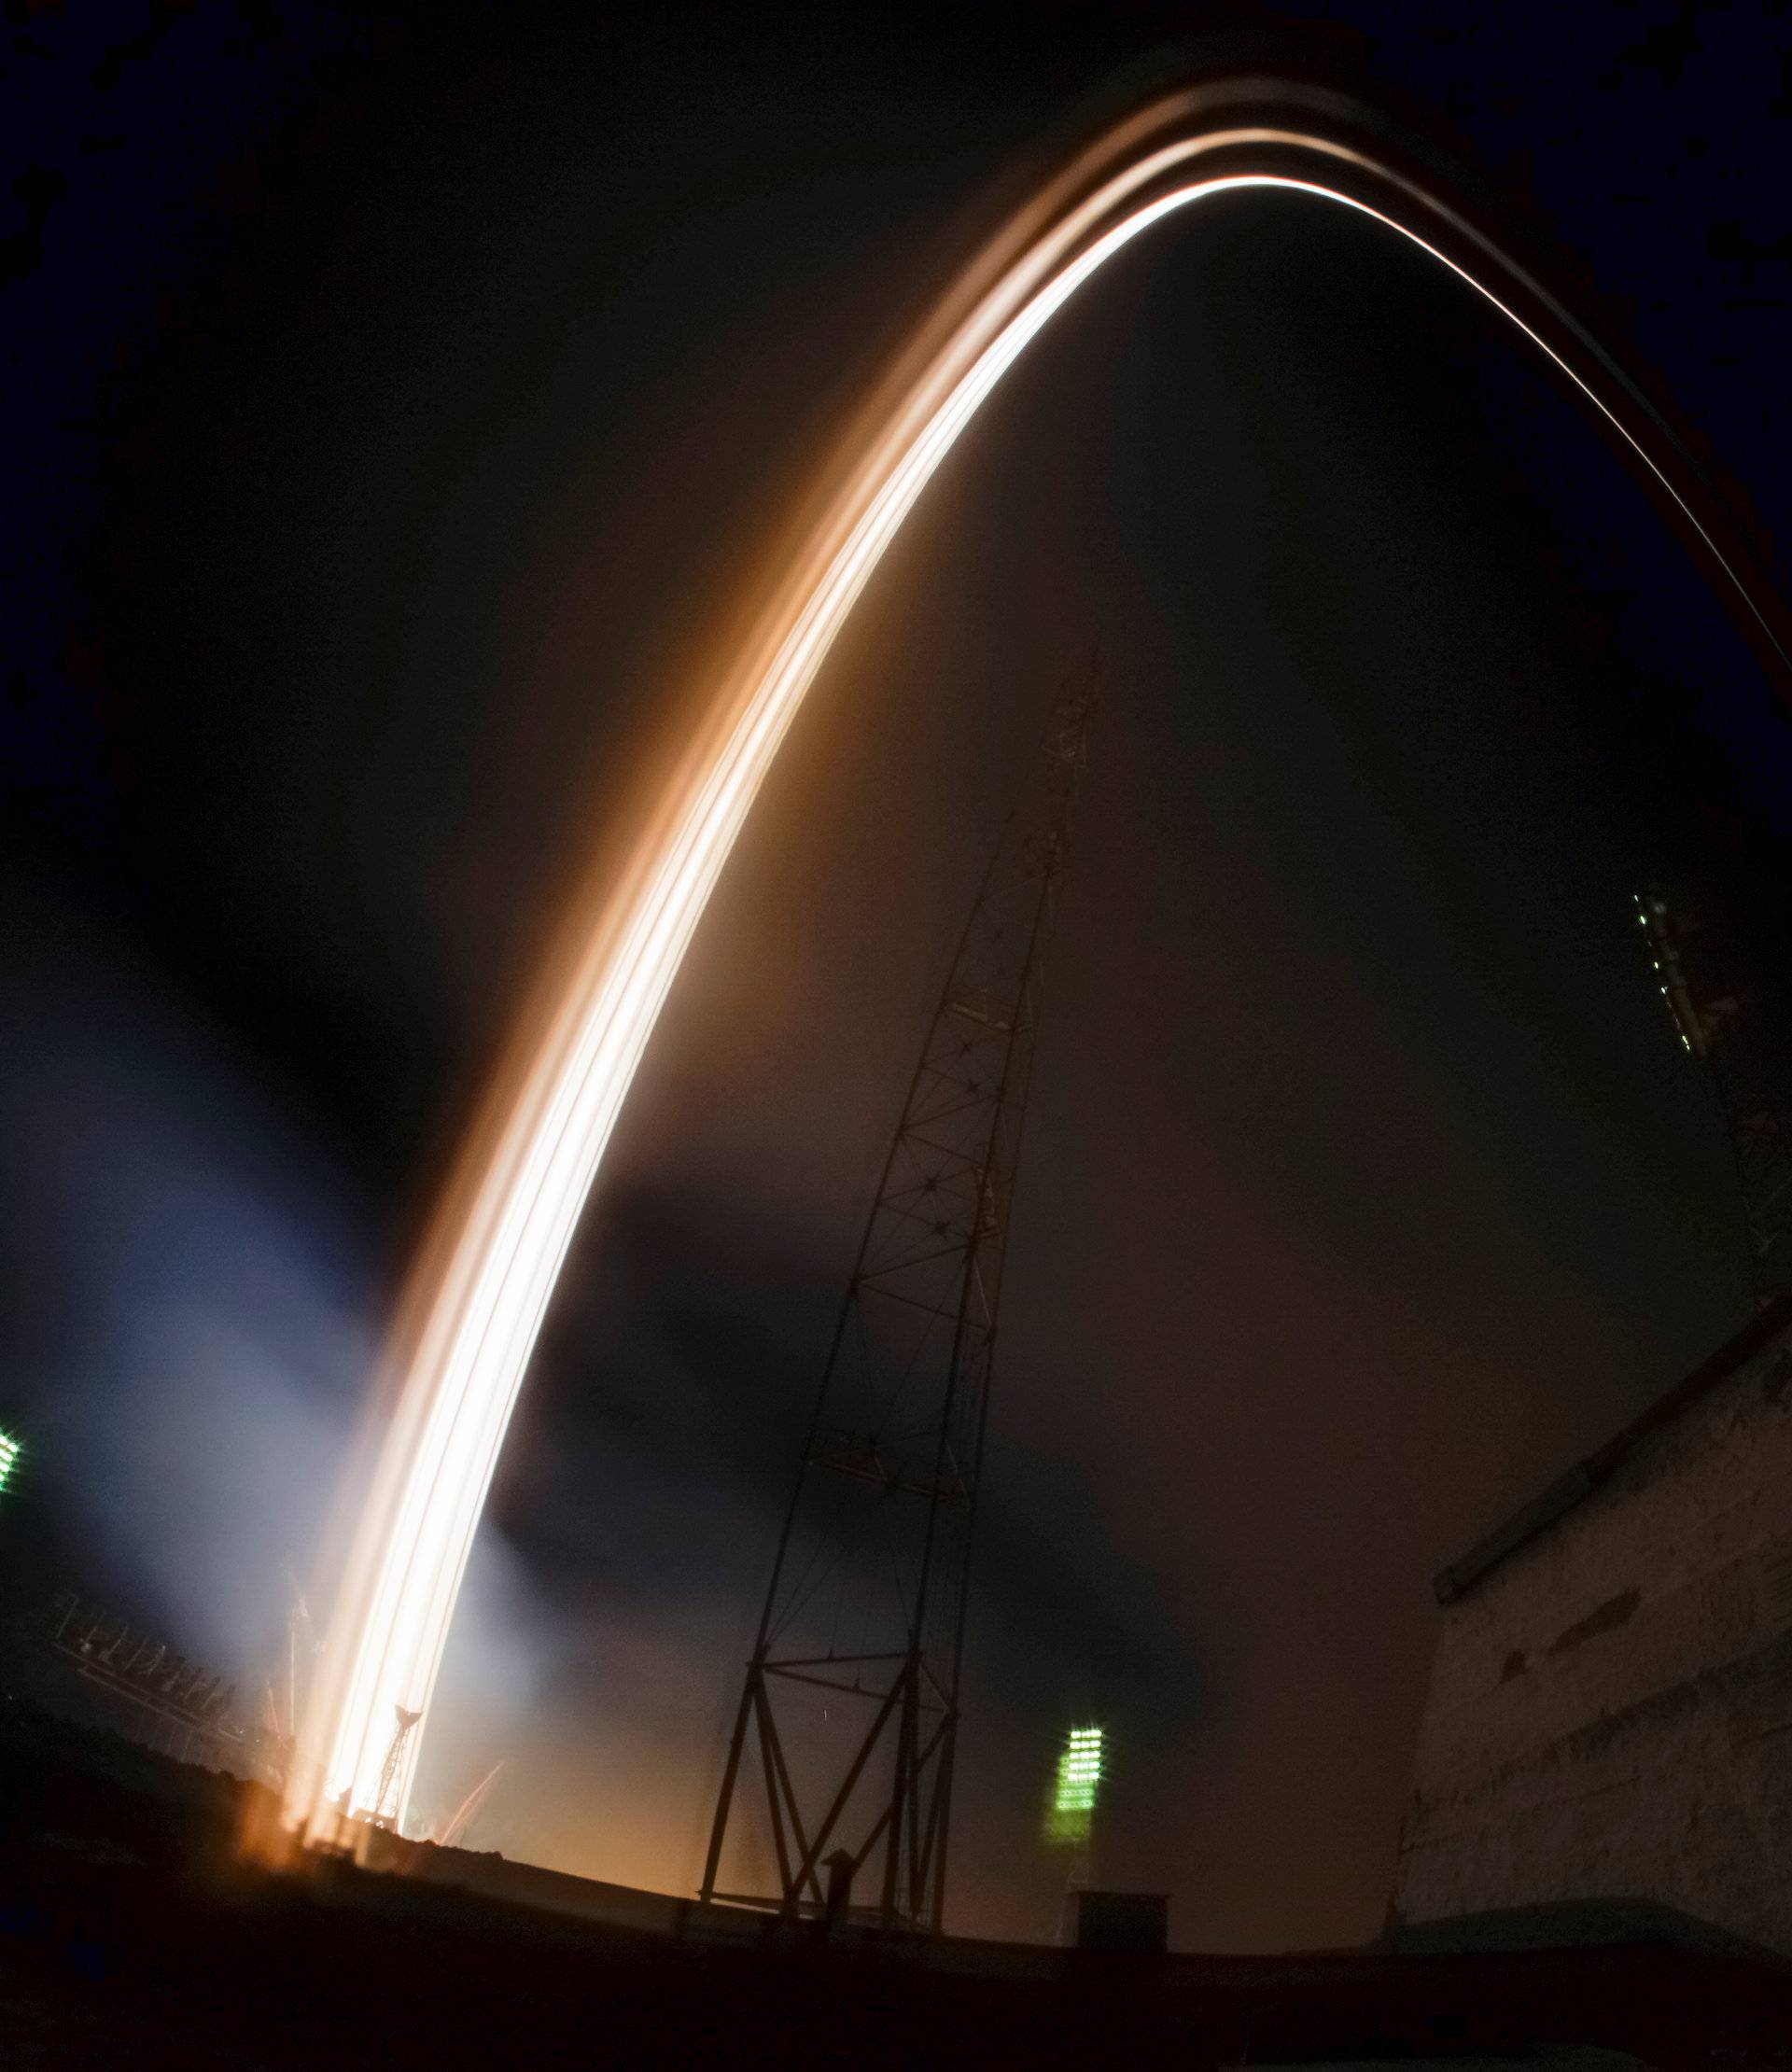 The Soyuz MS-03 spacecraft carrying the crew of Whitson of the U.S., Novitskiy of Russia and Pesquet of France blasts off to the International Space Station (ISS) from the launchpad at the Baikonur cosmodrome on this long axposure picture, Kazakhstan